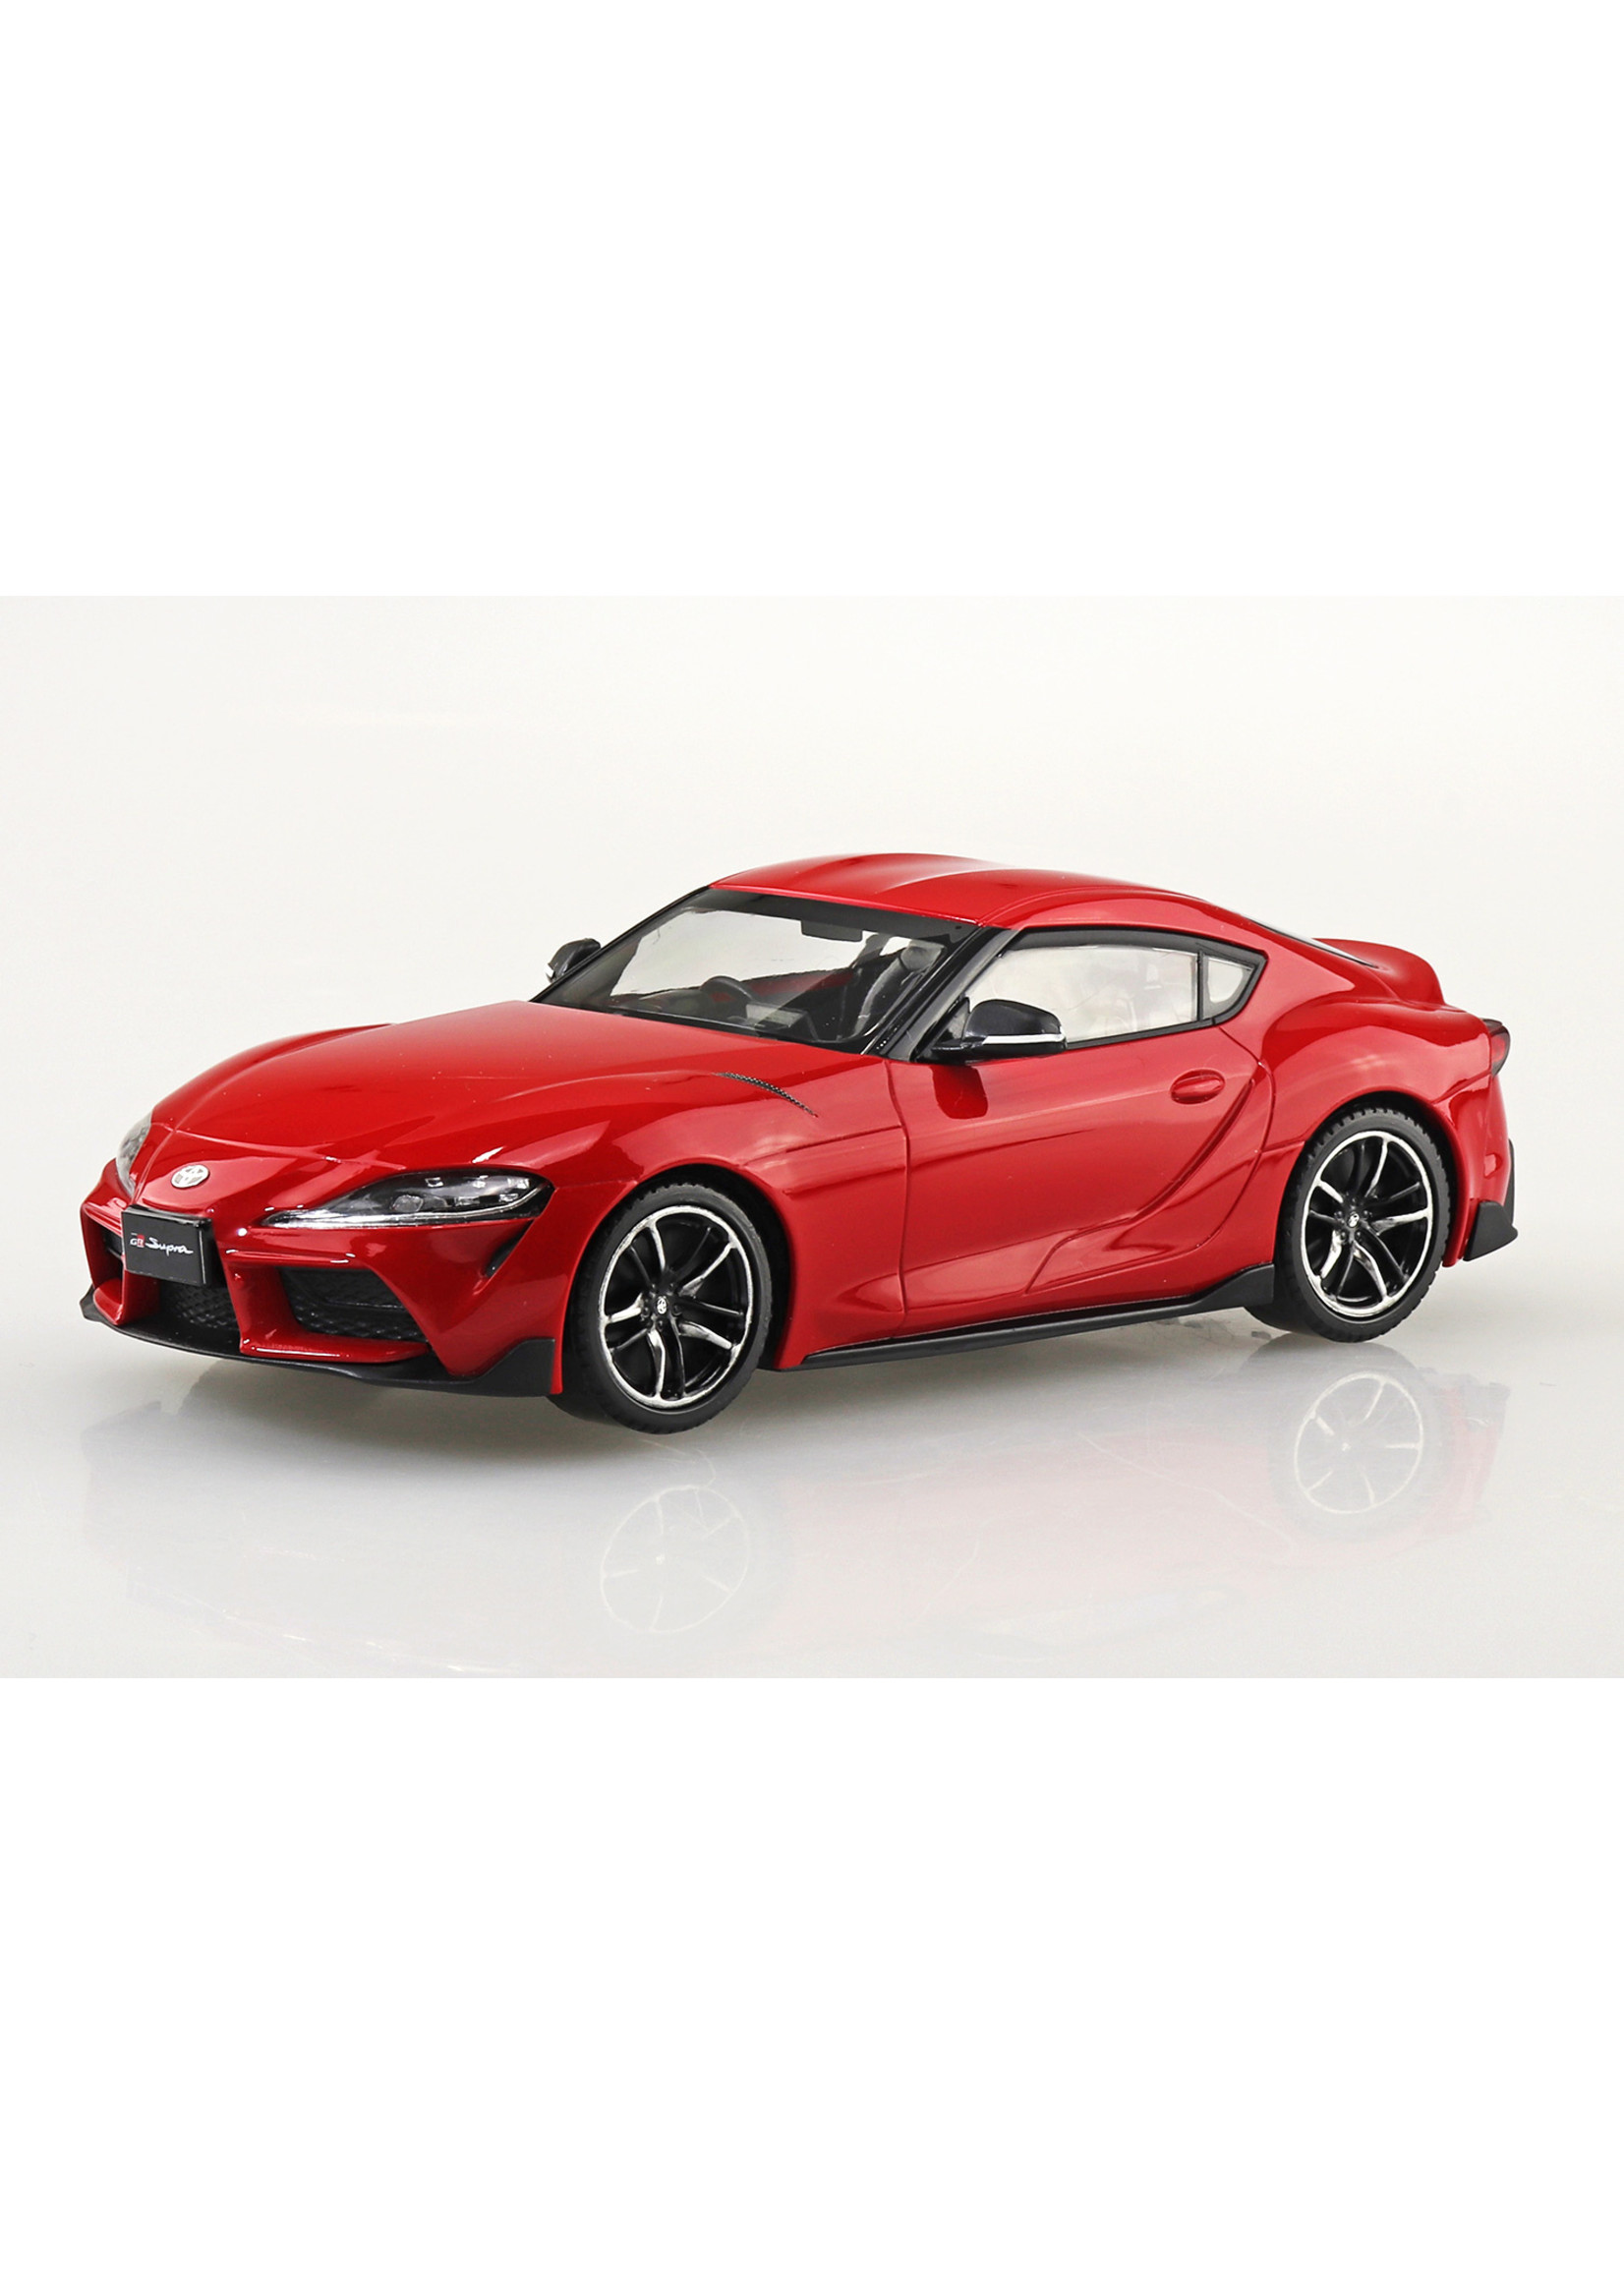 Aoshima 05885 - 1/32 Toyota GR Supra - Prominence Red